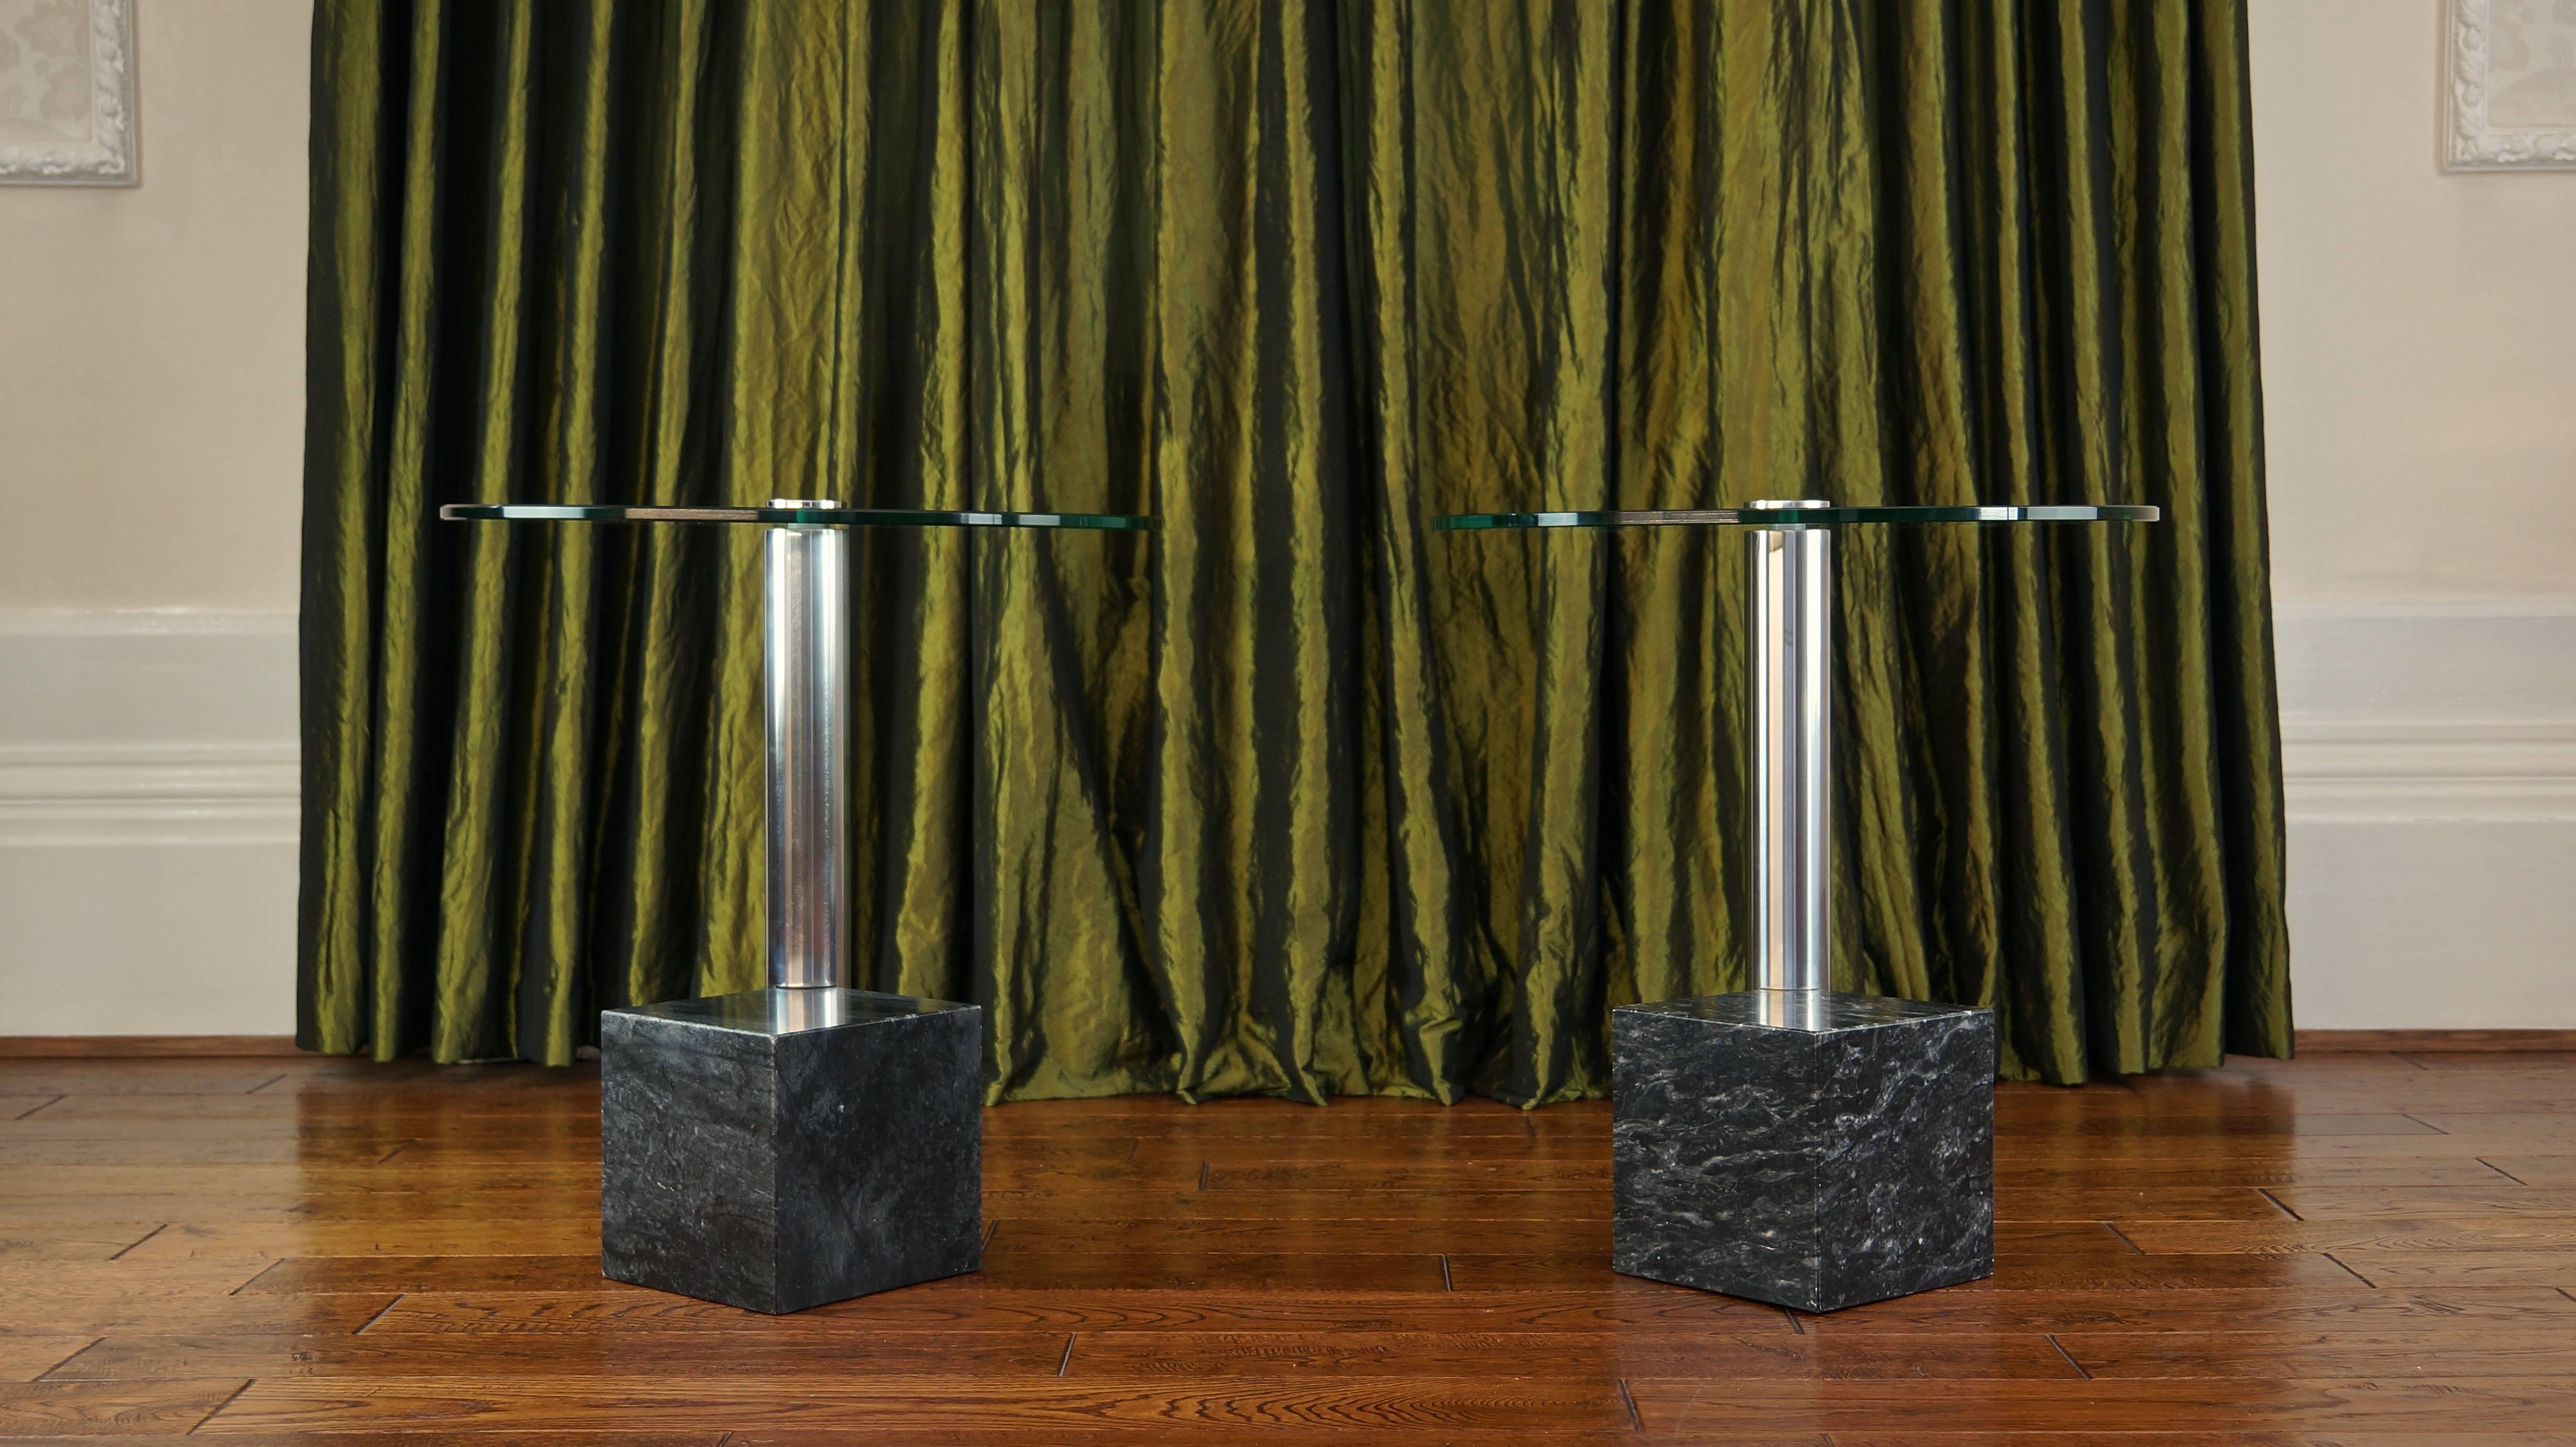 A pair of marble and glass HK2 side tables designed by Hank Kwint for Dutch makers Metaform dating from the 1980s.

These tables offer a clean, modern look and offer versatility due to the change in appearance depending on the position of the